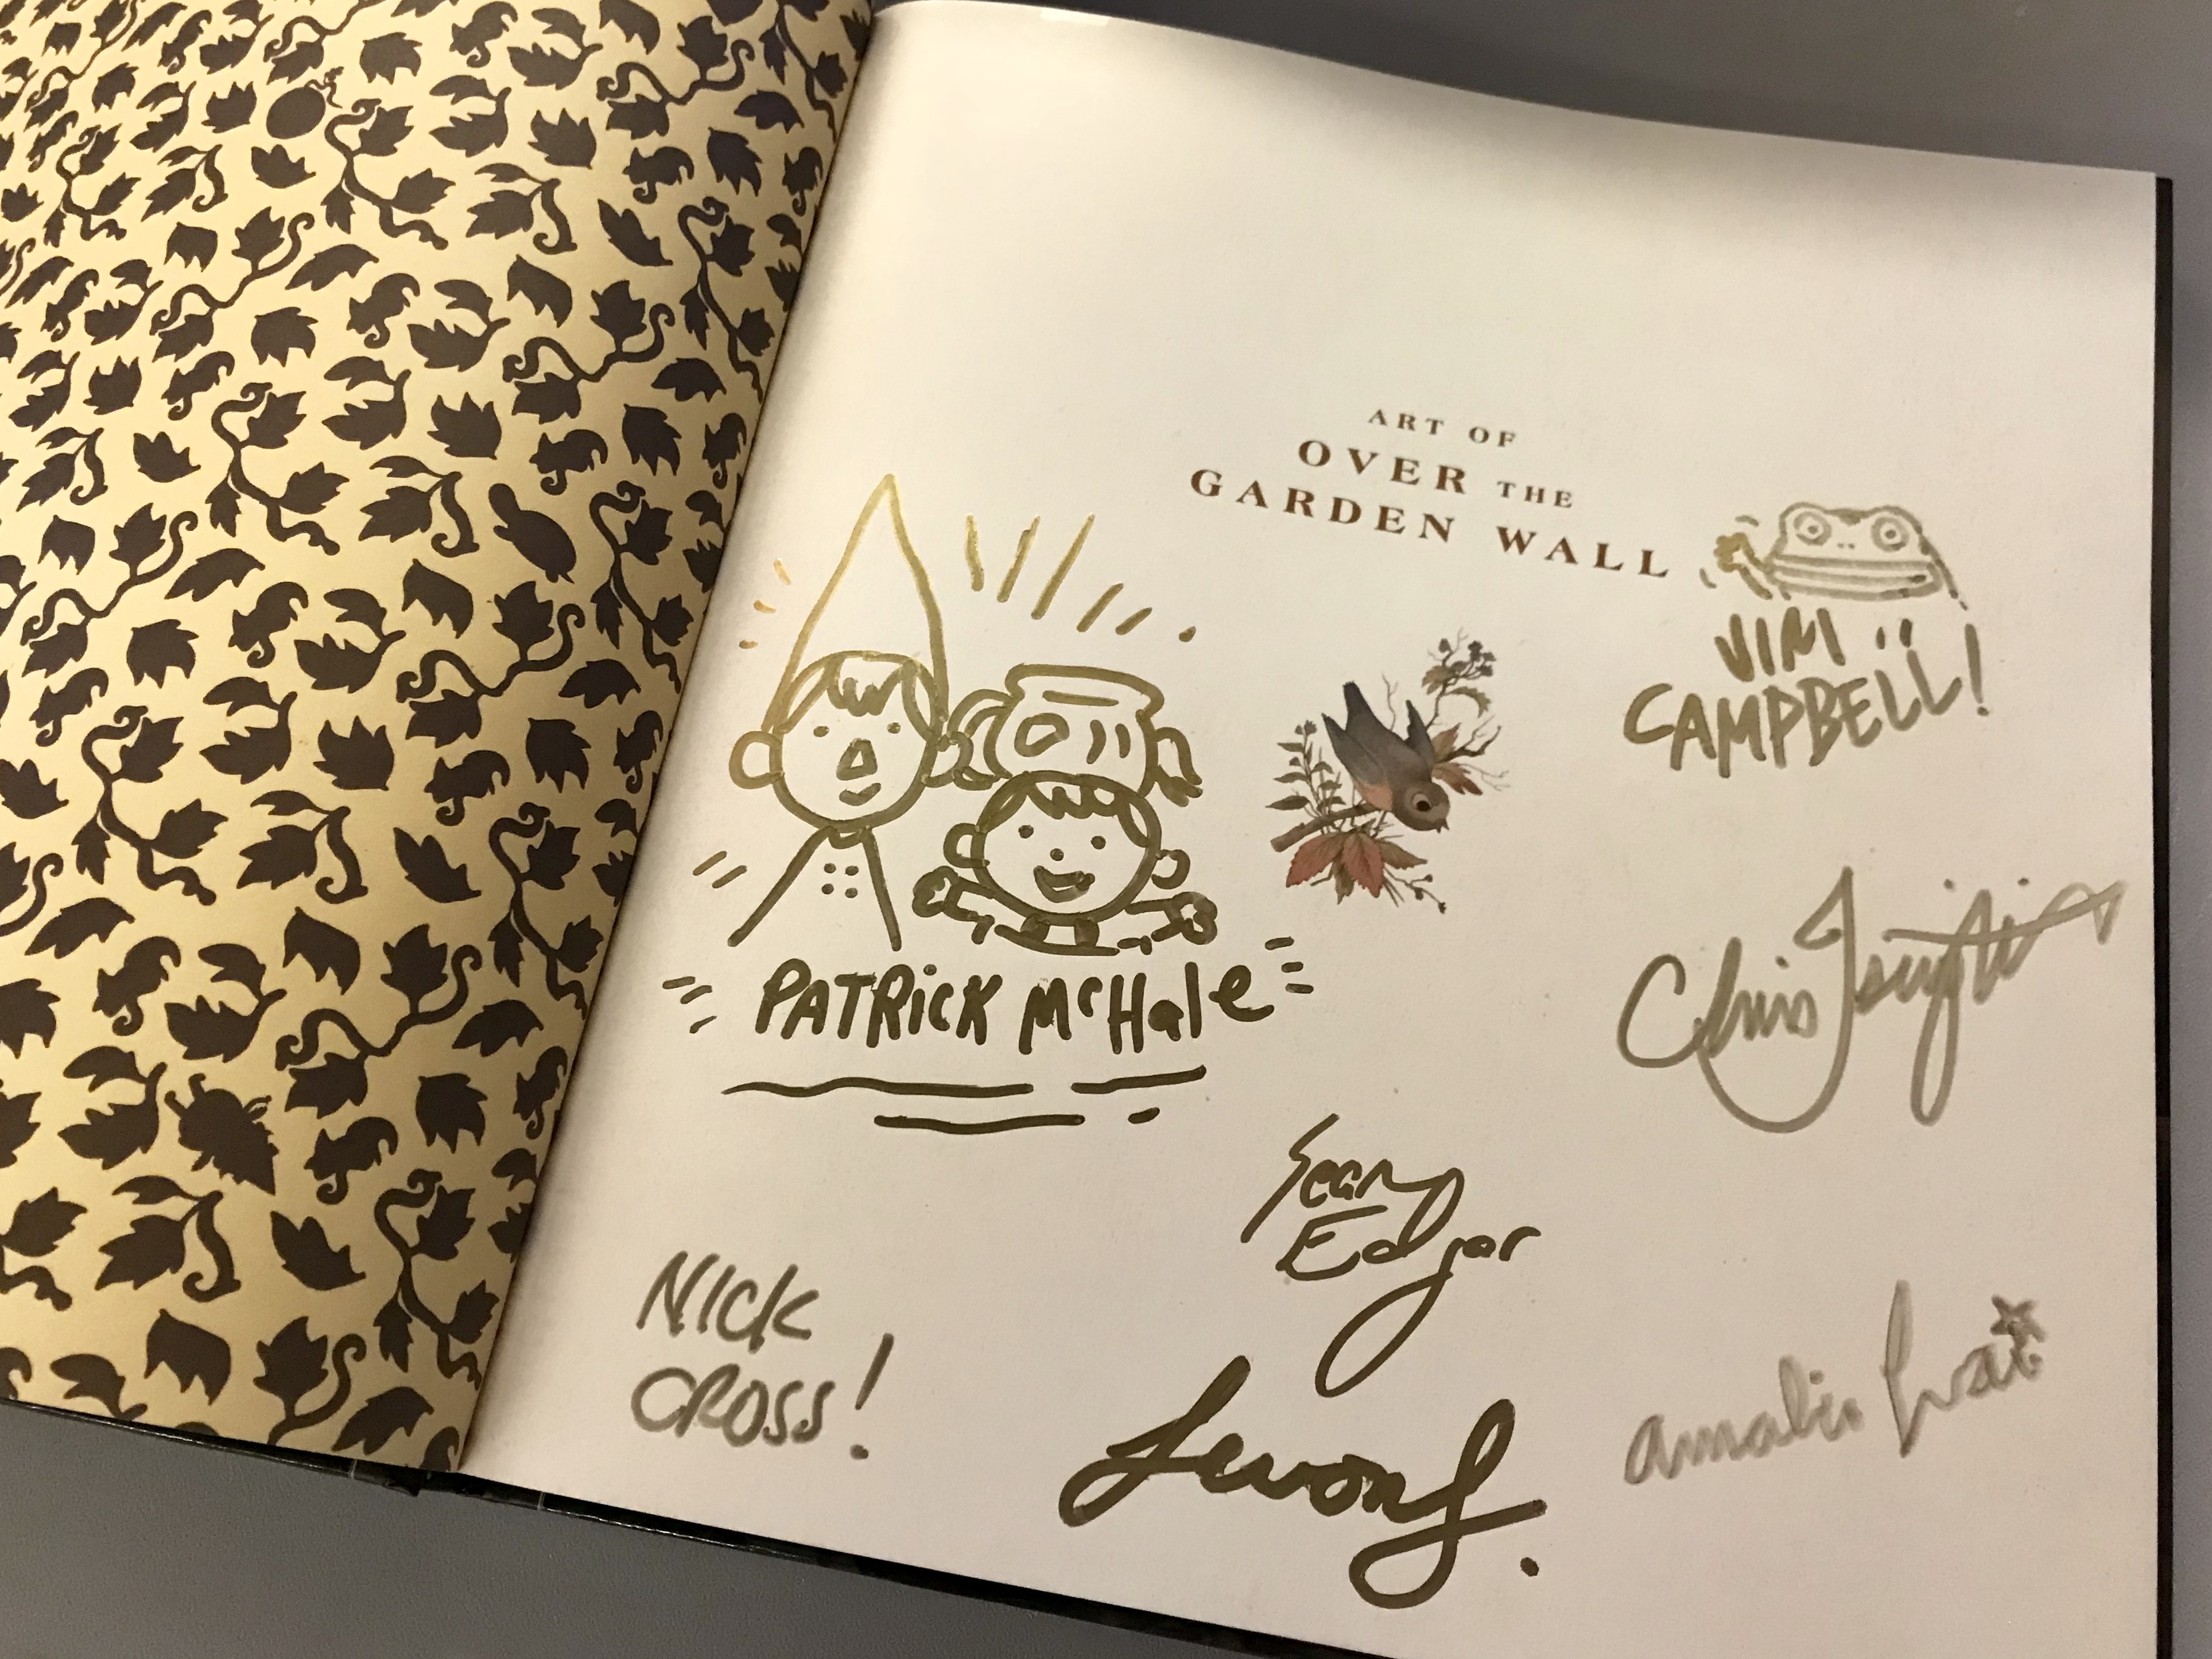 The special giveaway copy of The Art of Over the Garden Wall, signed by creators!